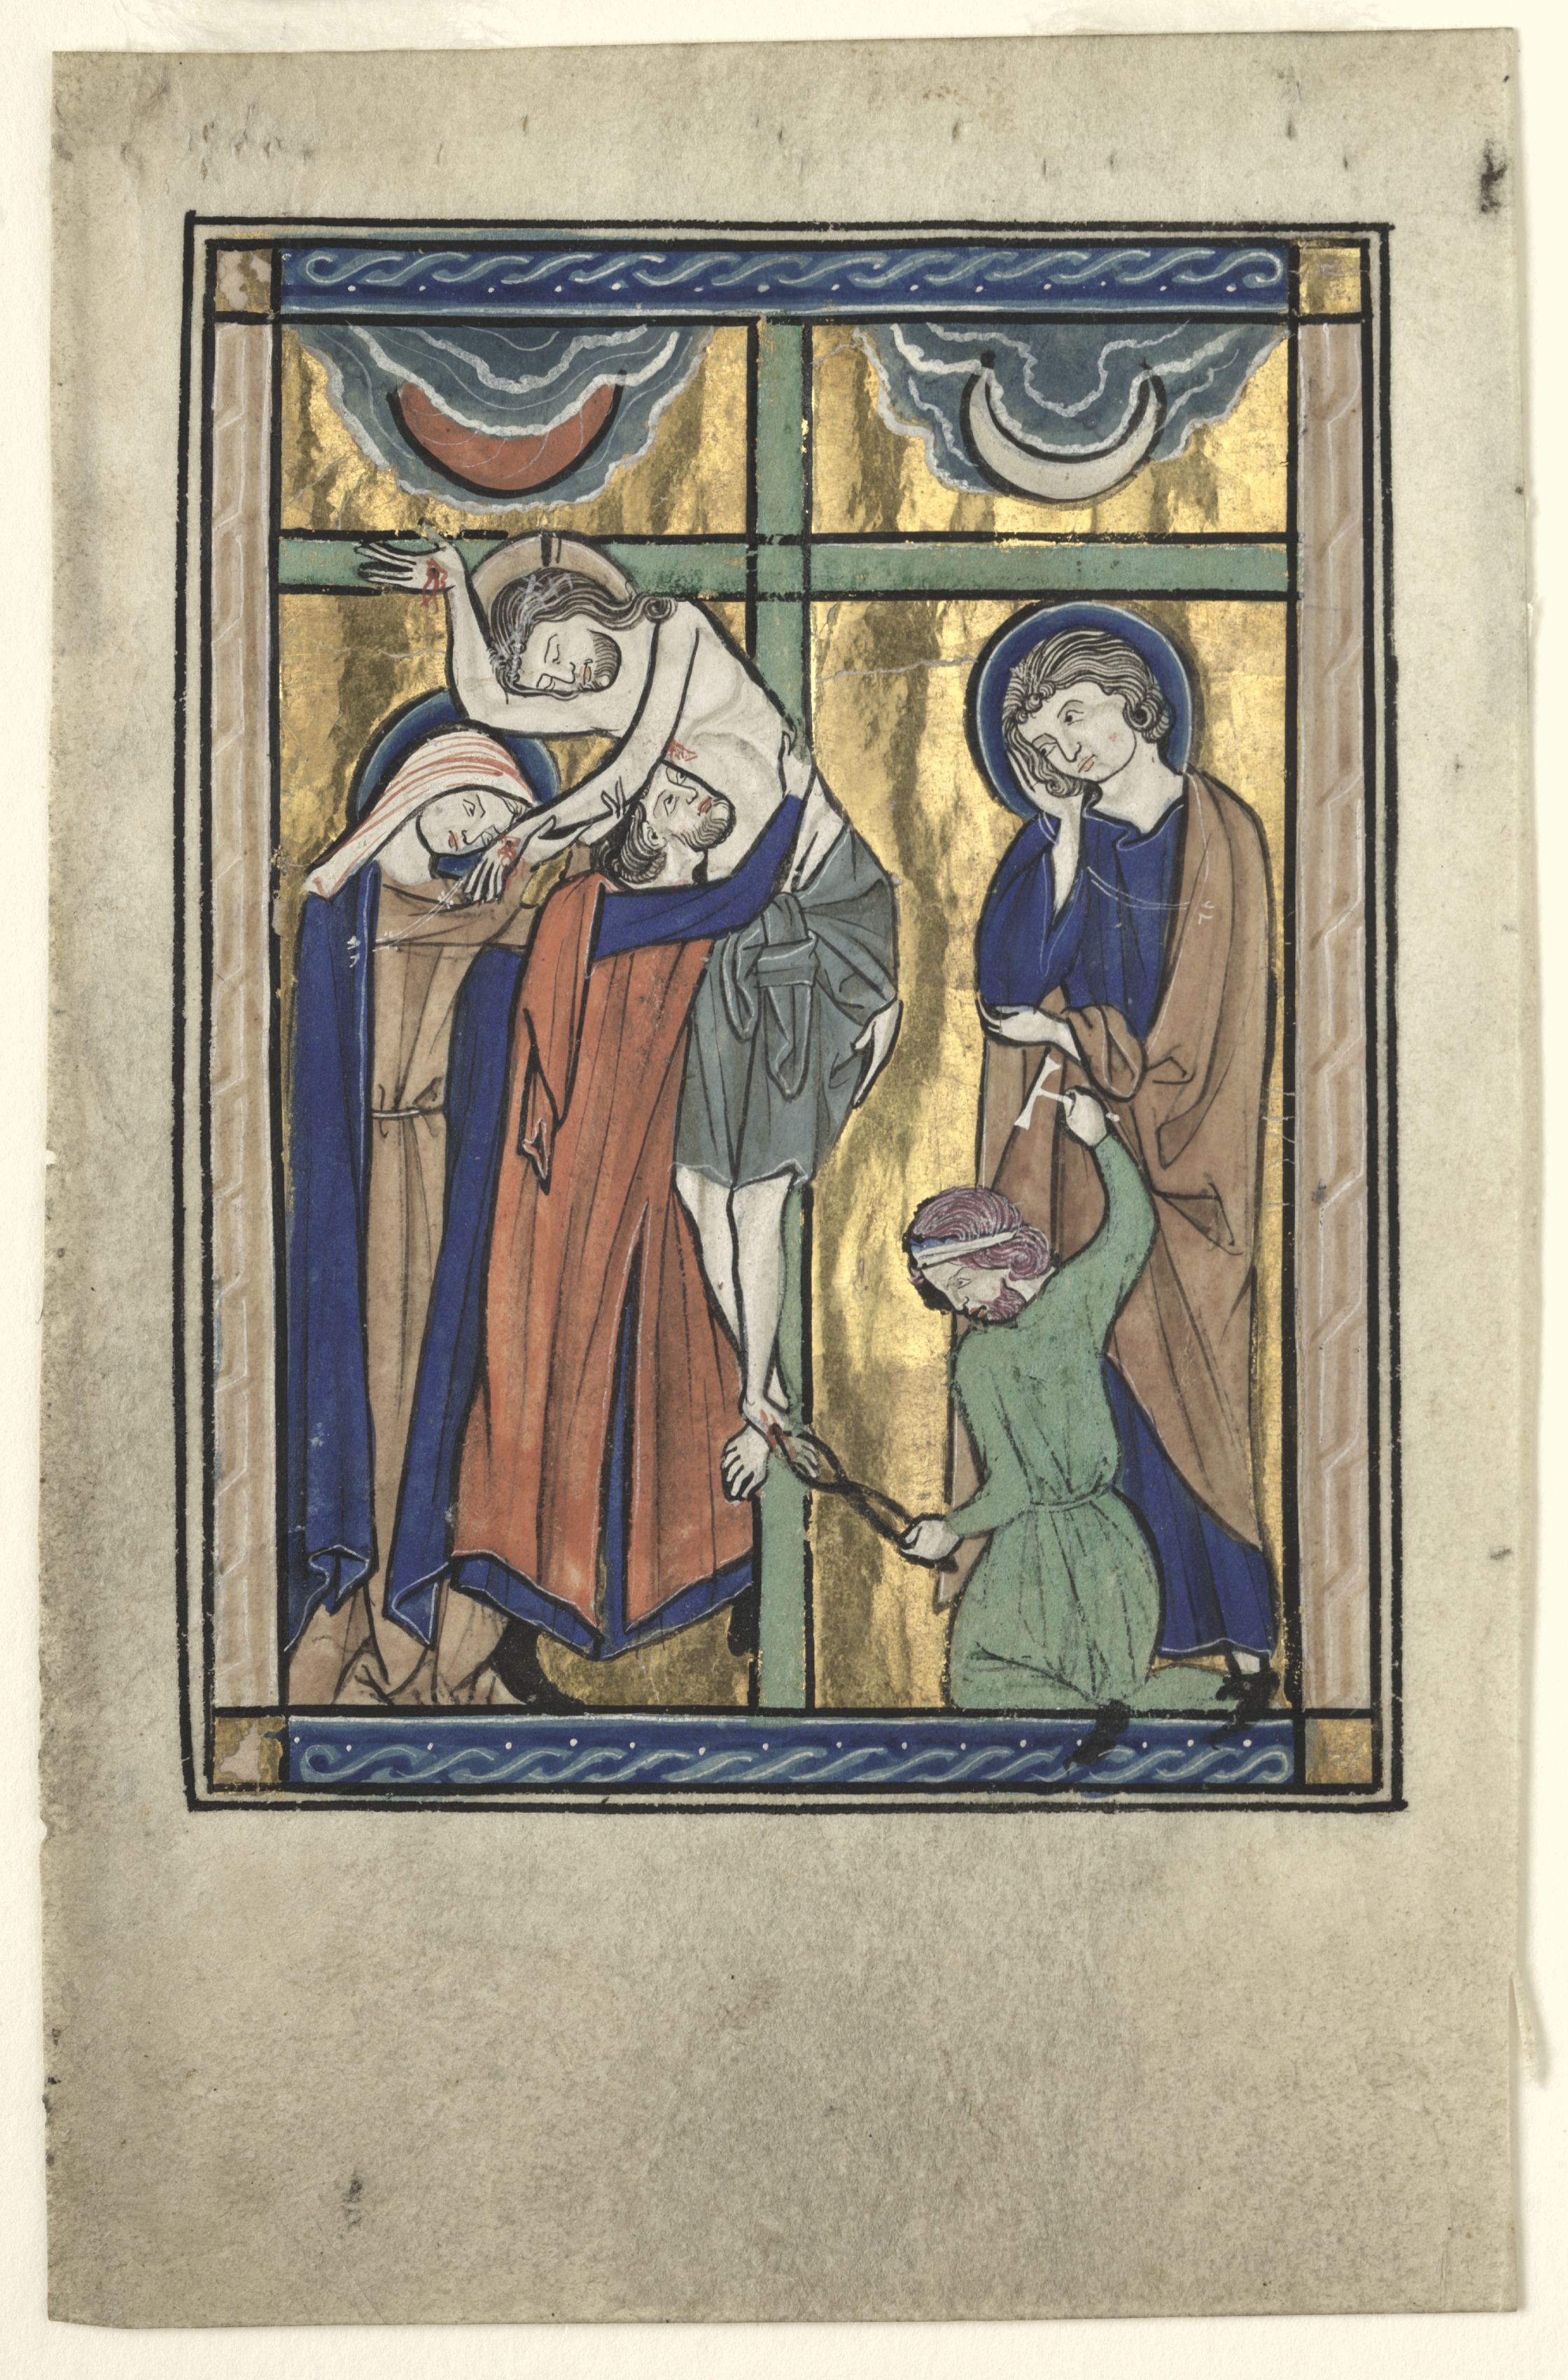 Miniature Excised from the "Potocki Psalter": The Deposition